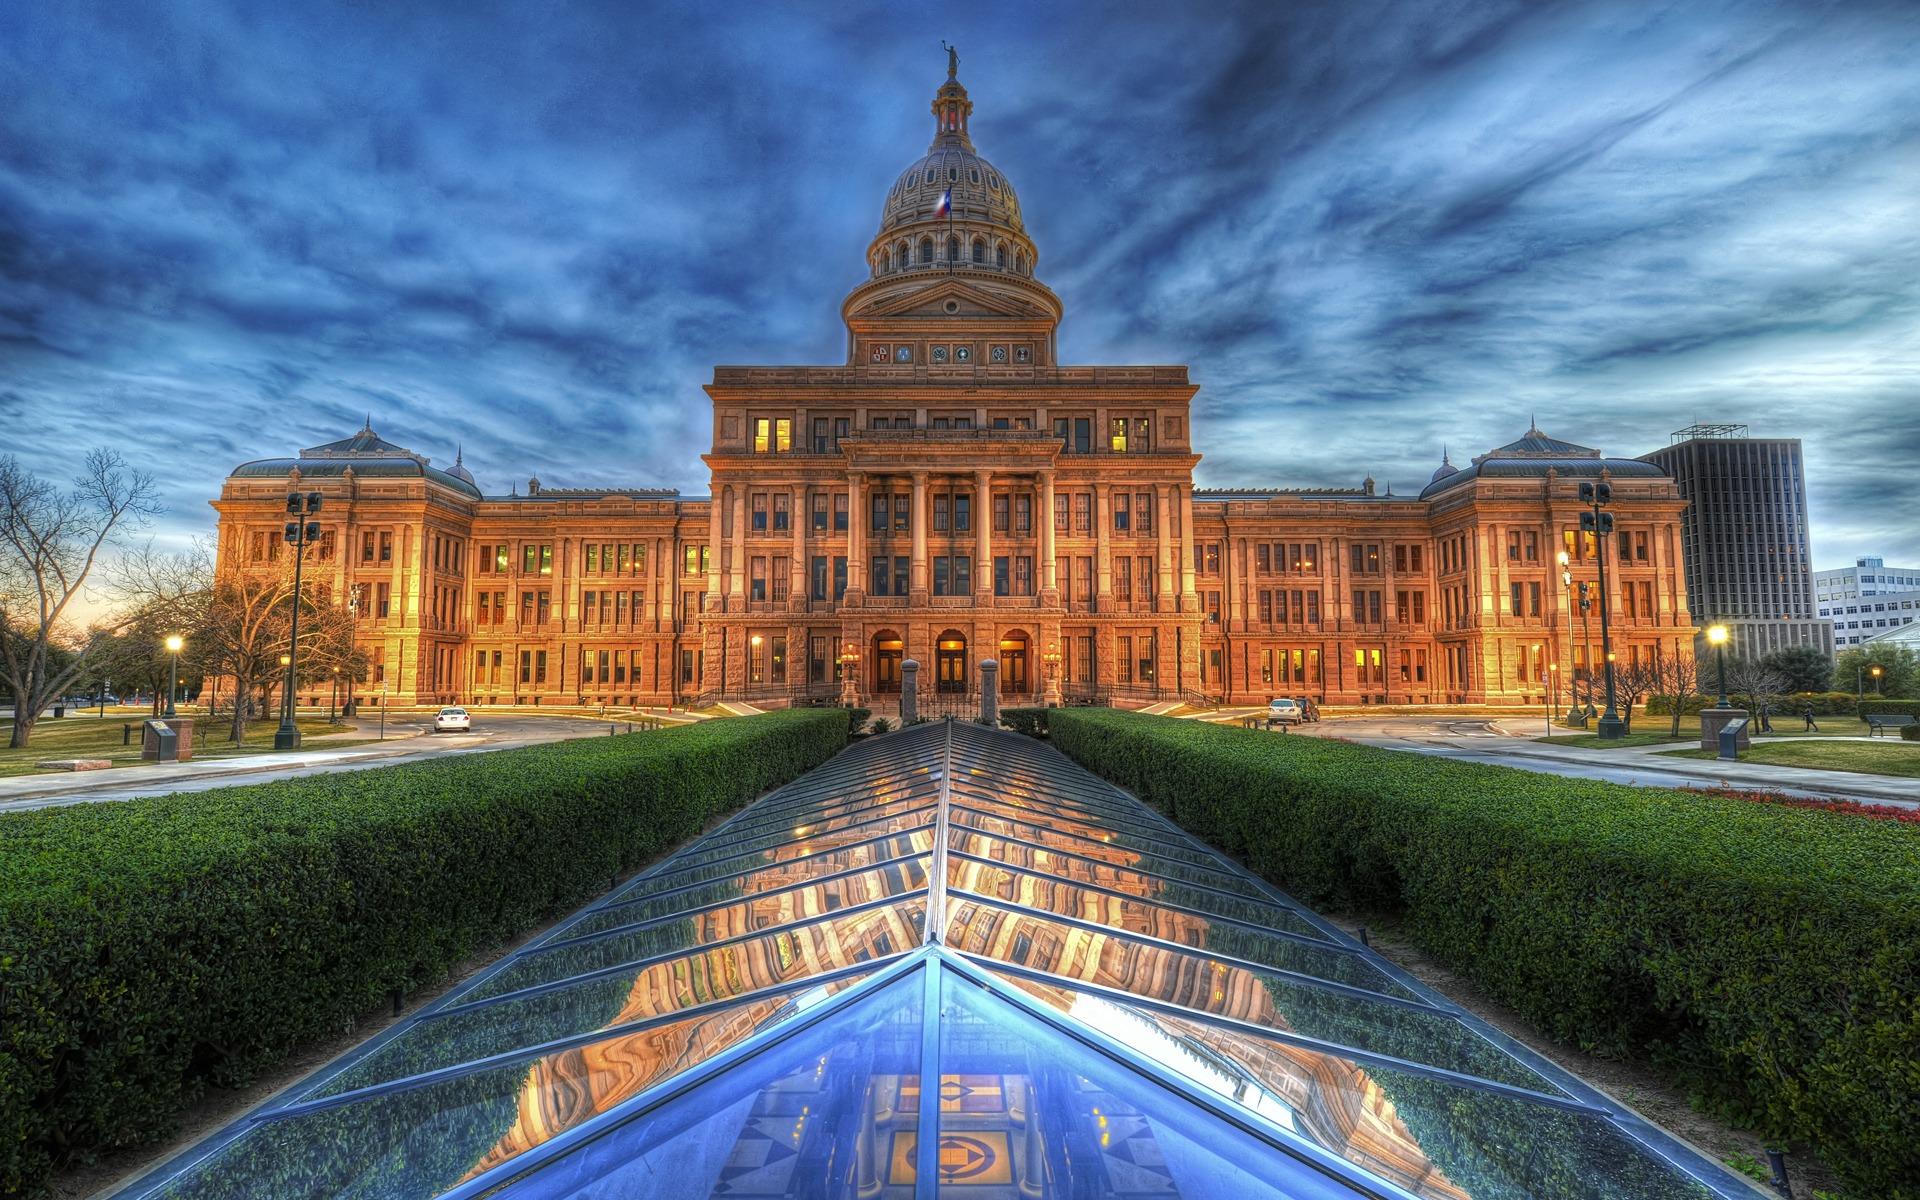 Texas State Capitol Wallpaper United States World Wallpaper in jpg